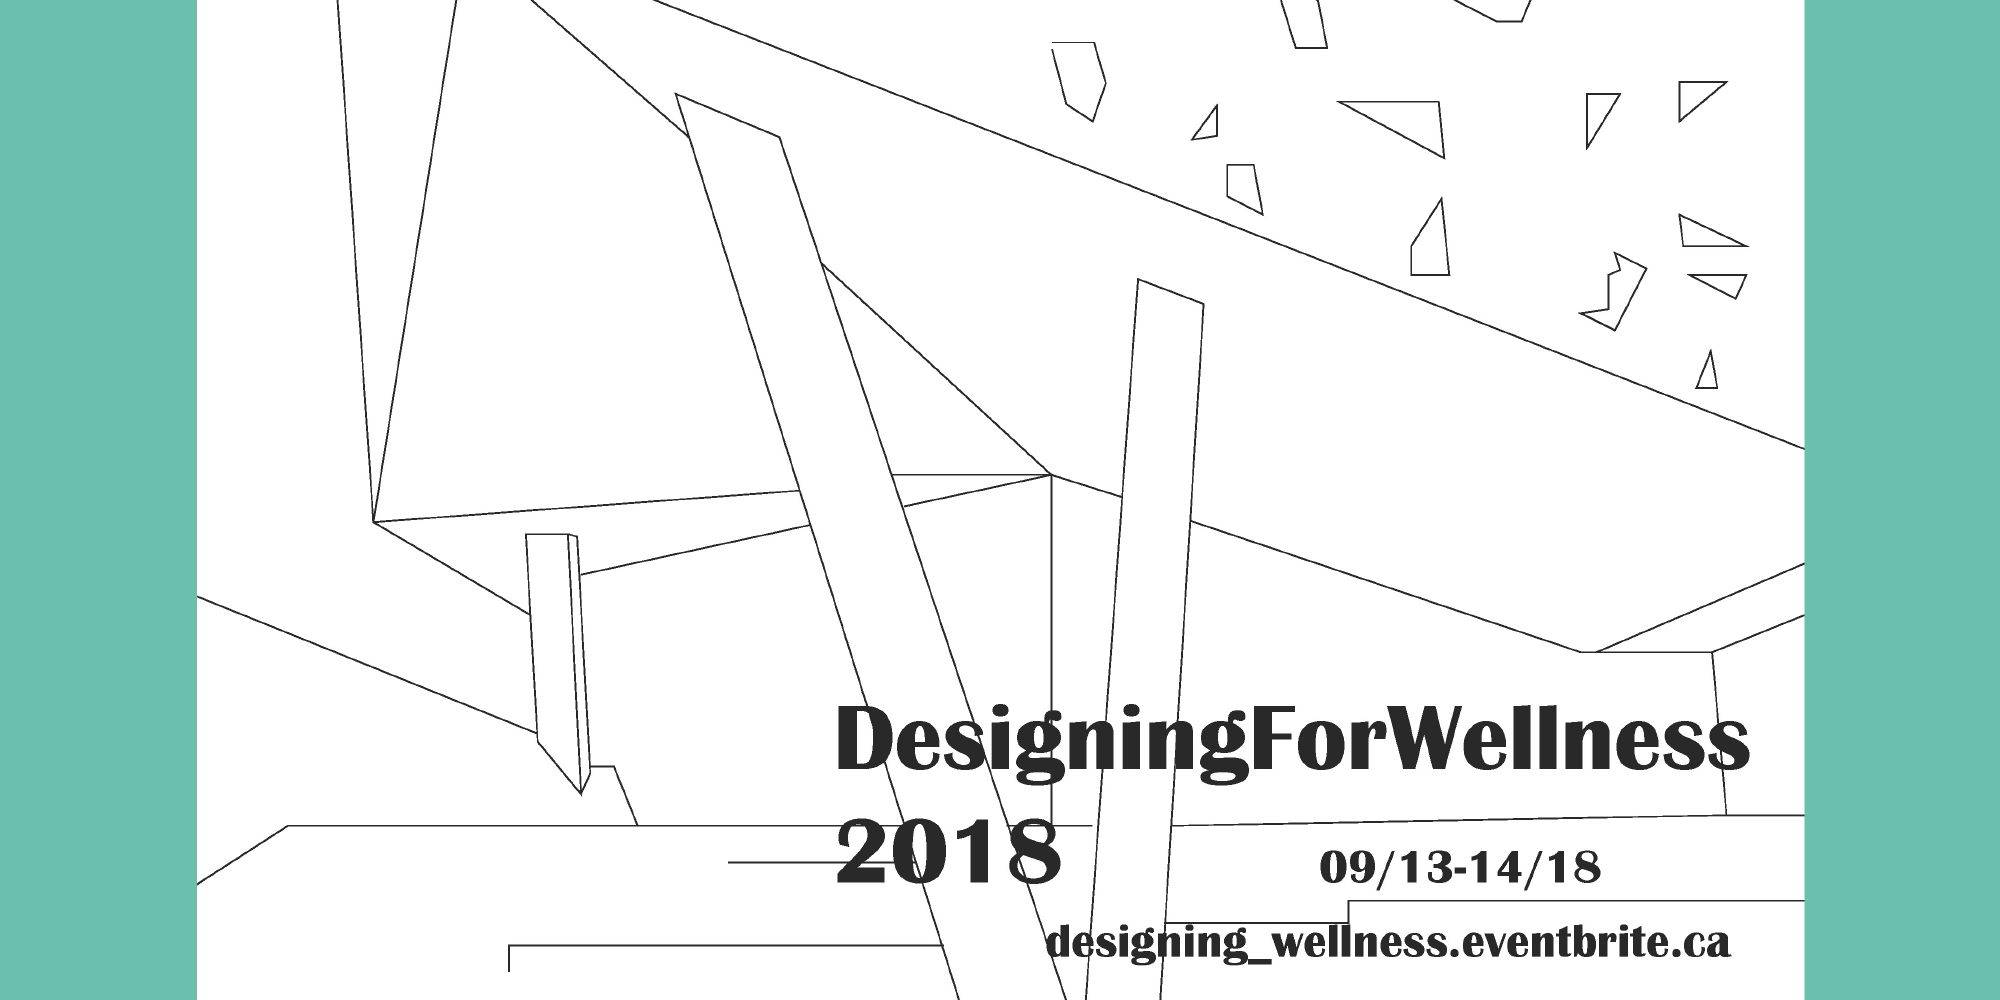 Abstract poster for the Designing For Wellness 2018 event that was organized by School of Interior Design and the Faculty of Communication and Design.